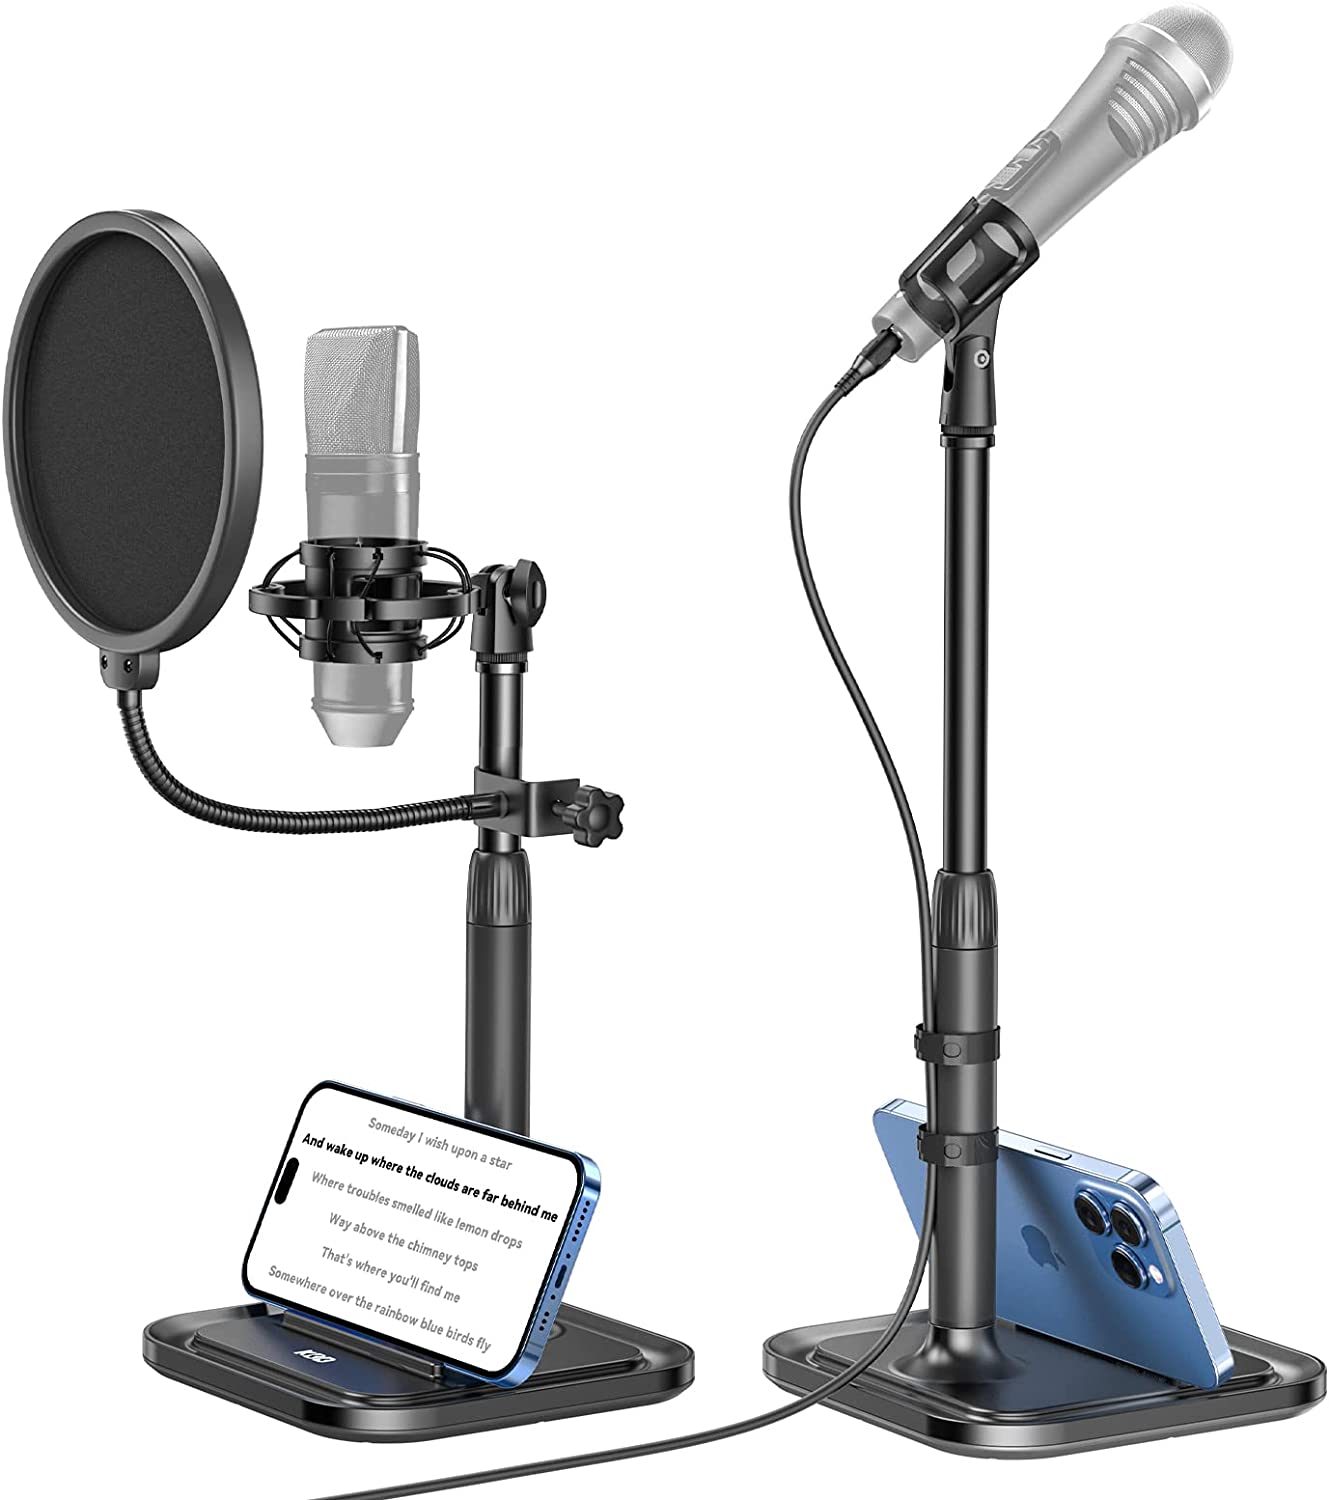 Desktop Microphone Stand with Phone Holder